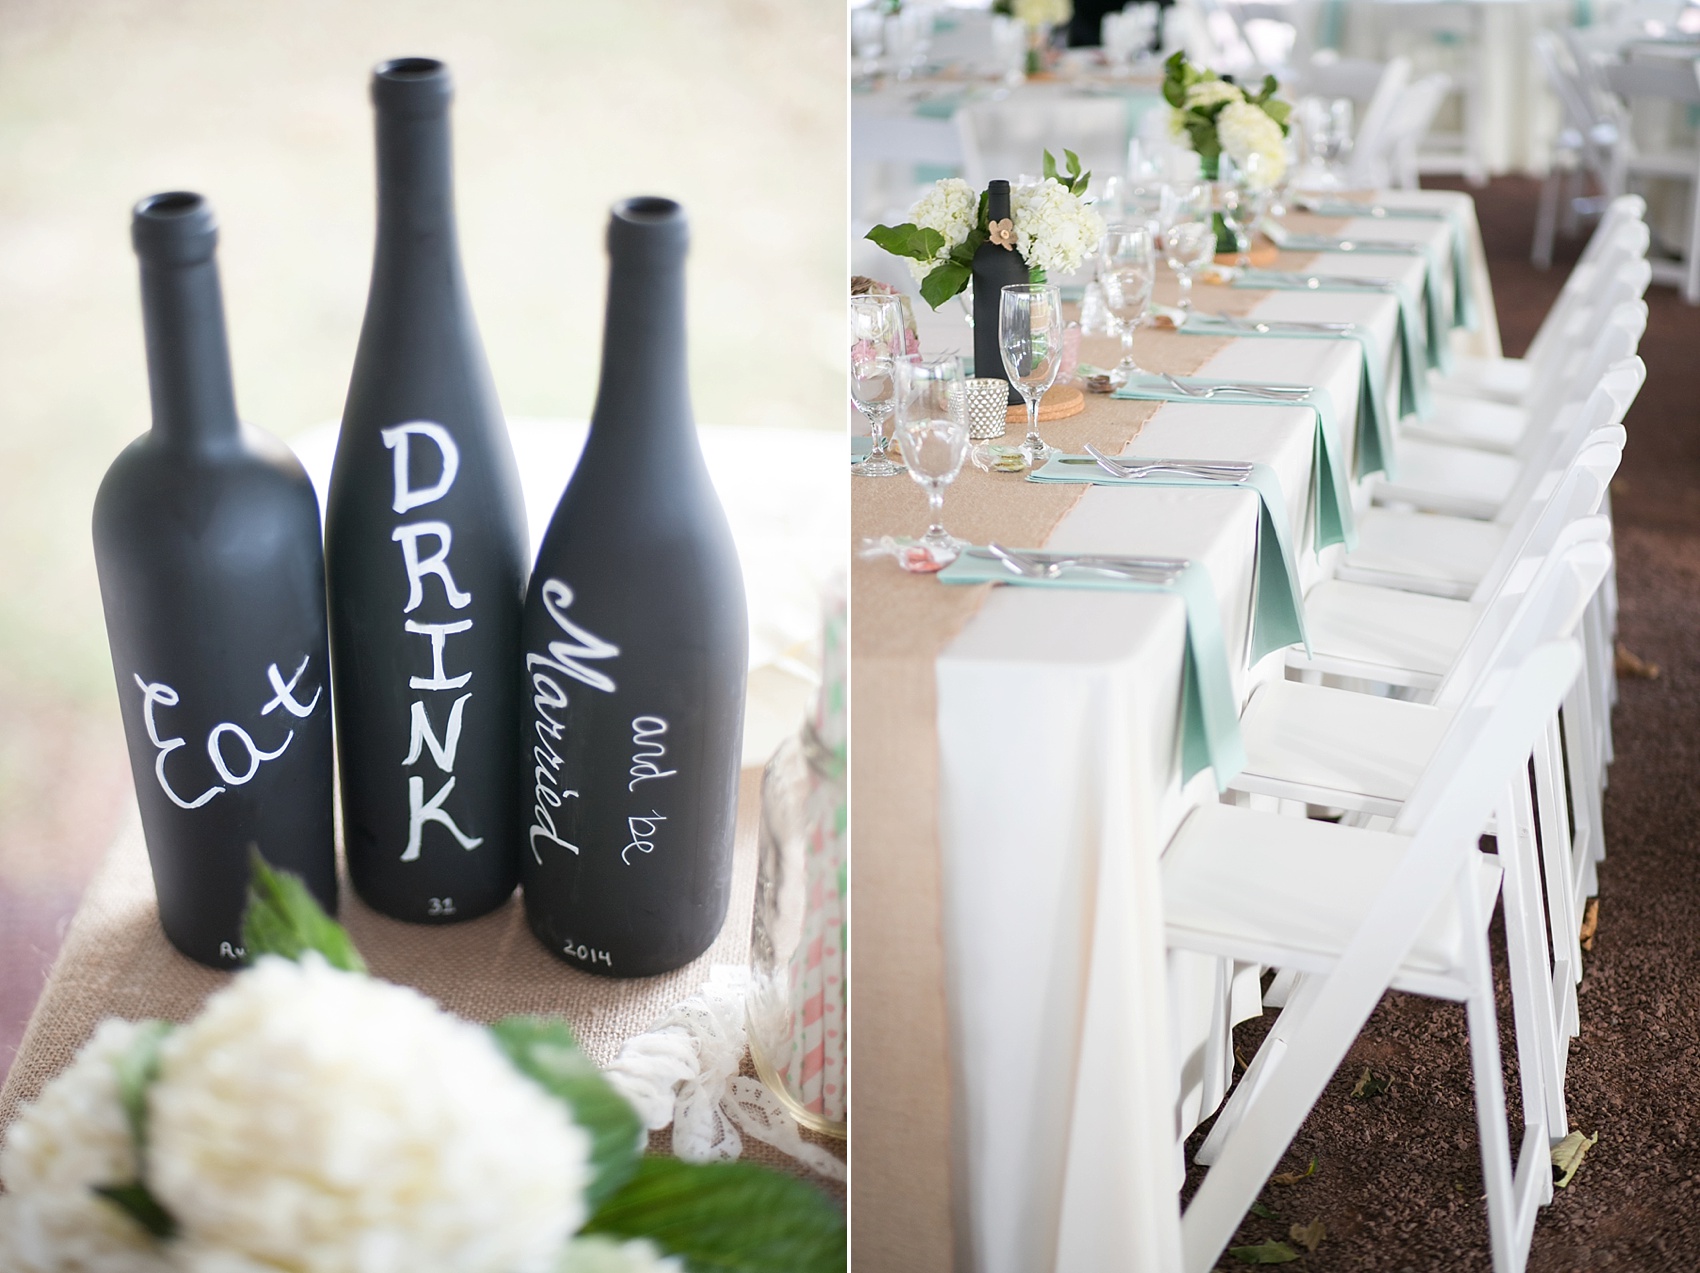 Hopewell Valley Vineyards wedding details. Photos by New Jersey wedding photographer, Mikkel Paige Photography.